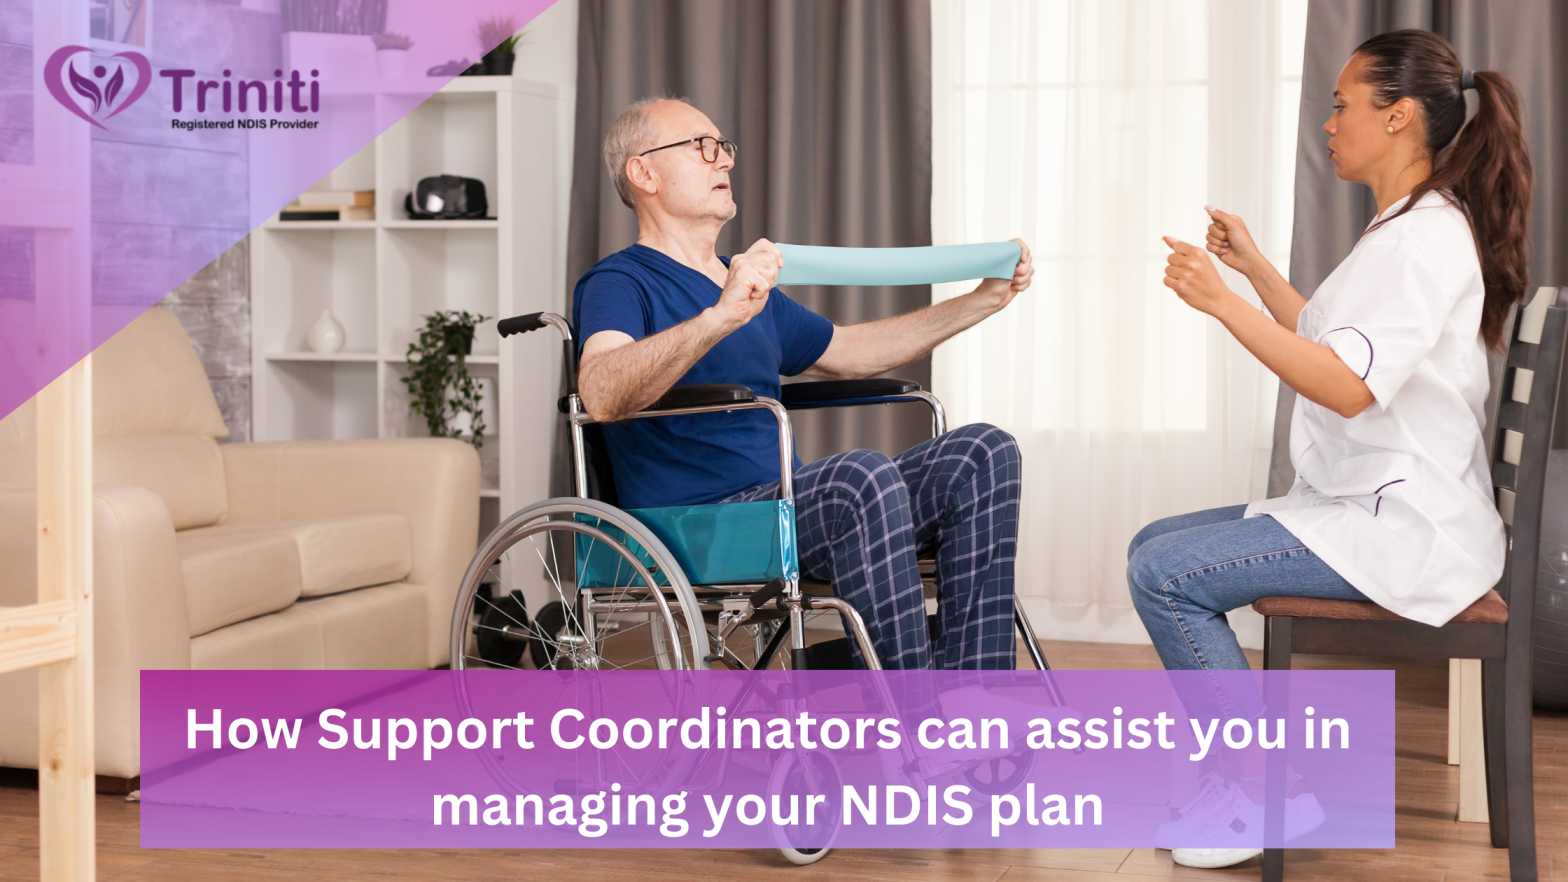 How Support Coordinators can assist you in managing your NDIS plan